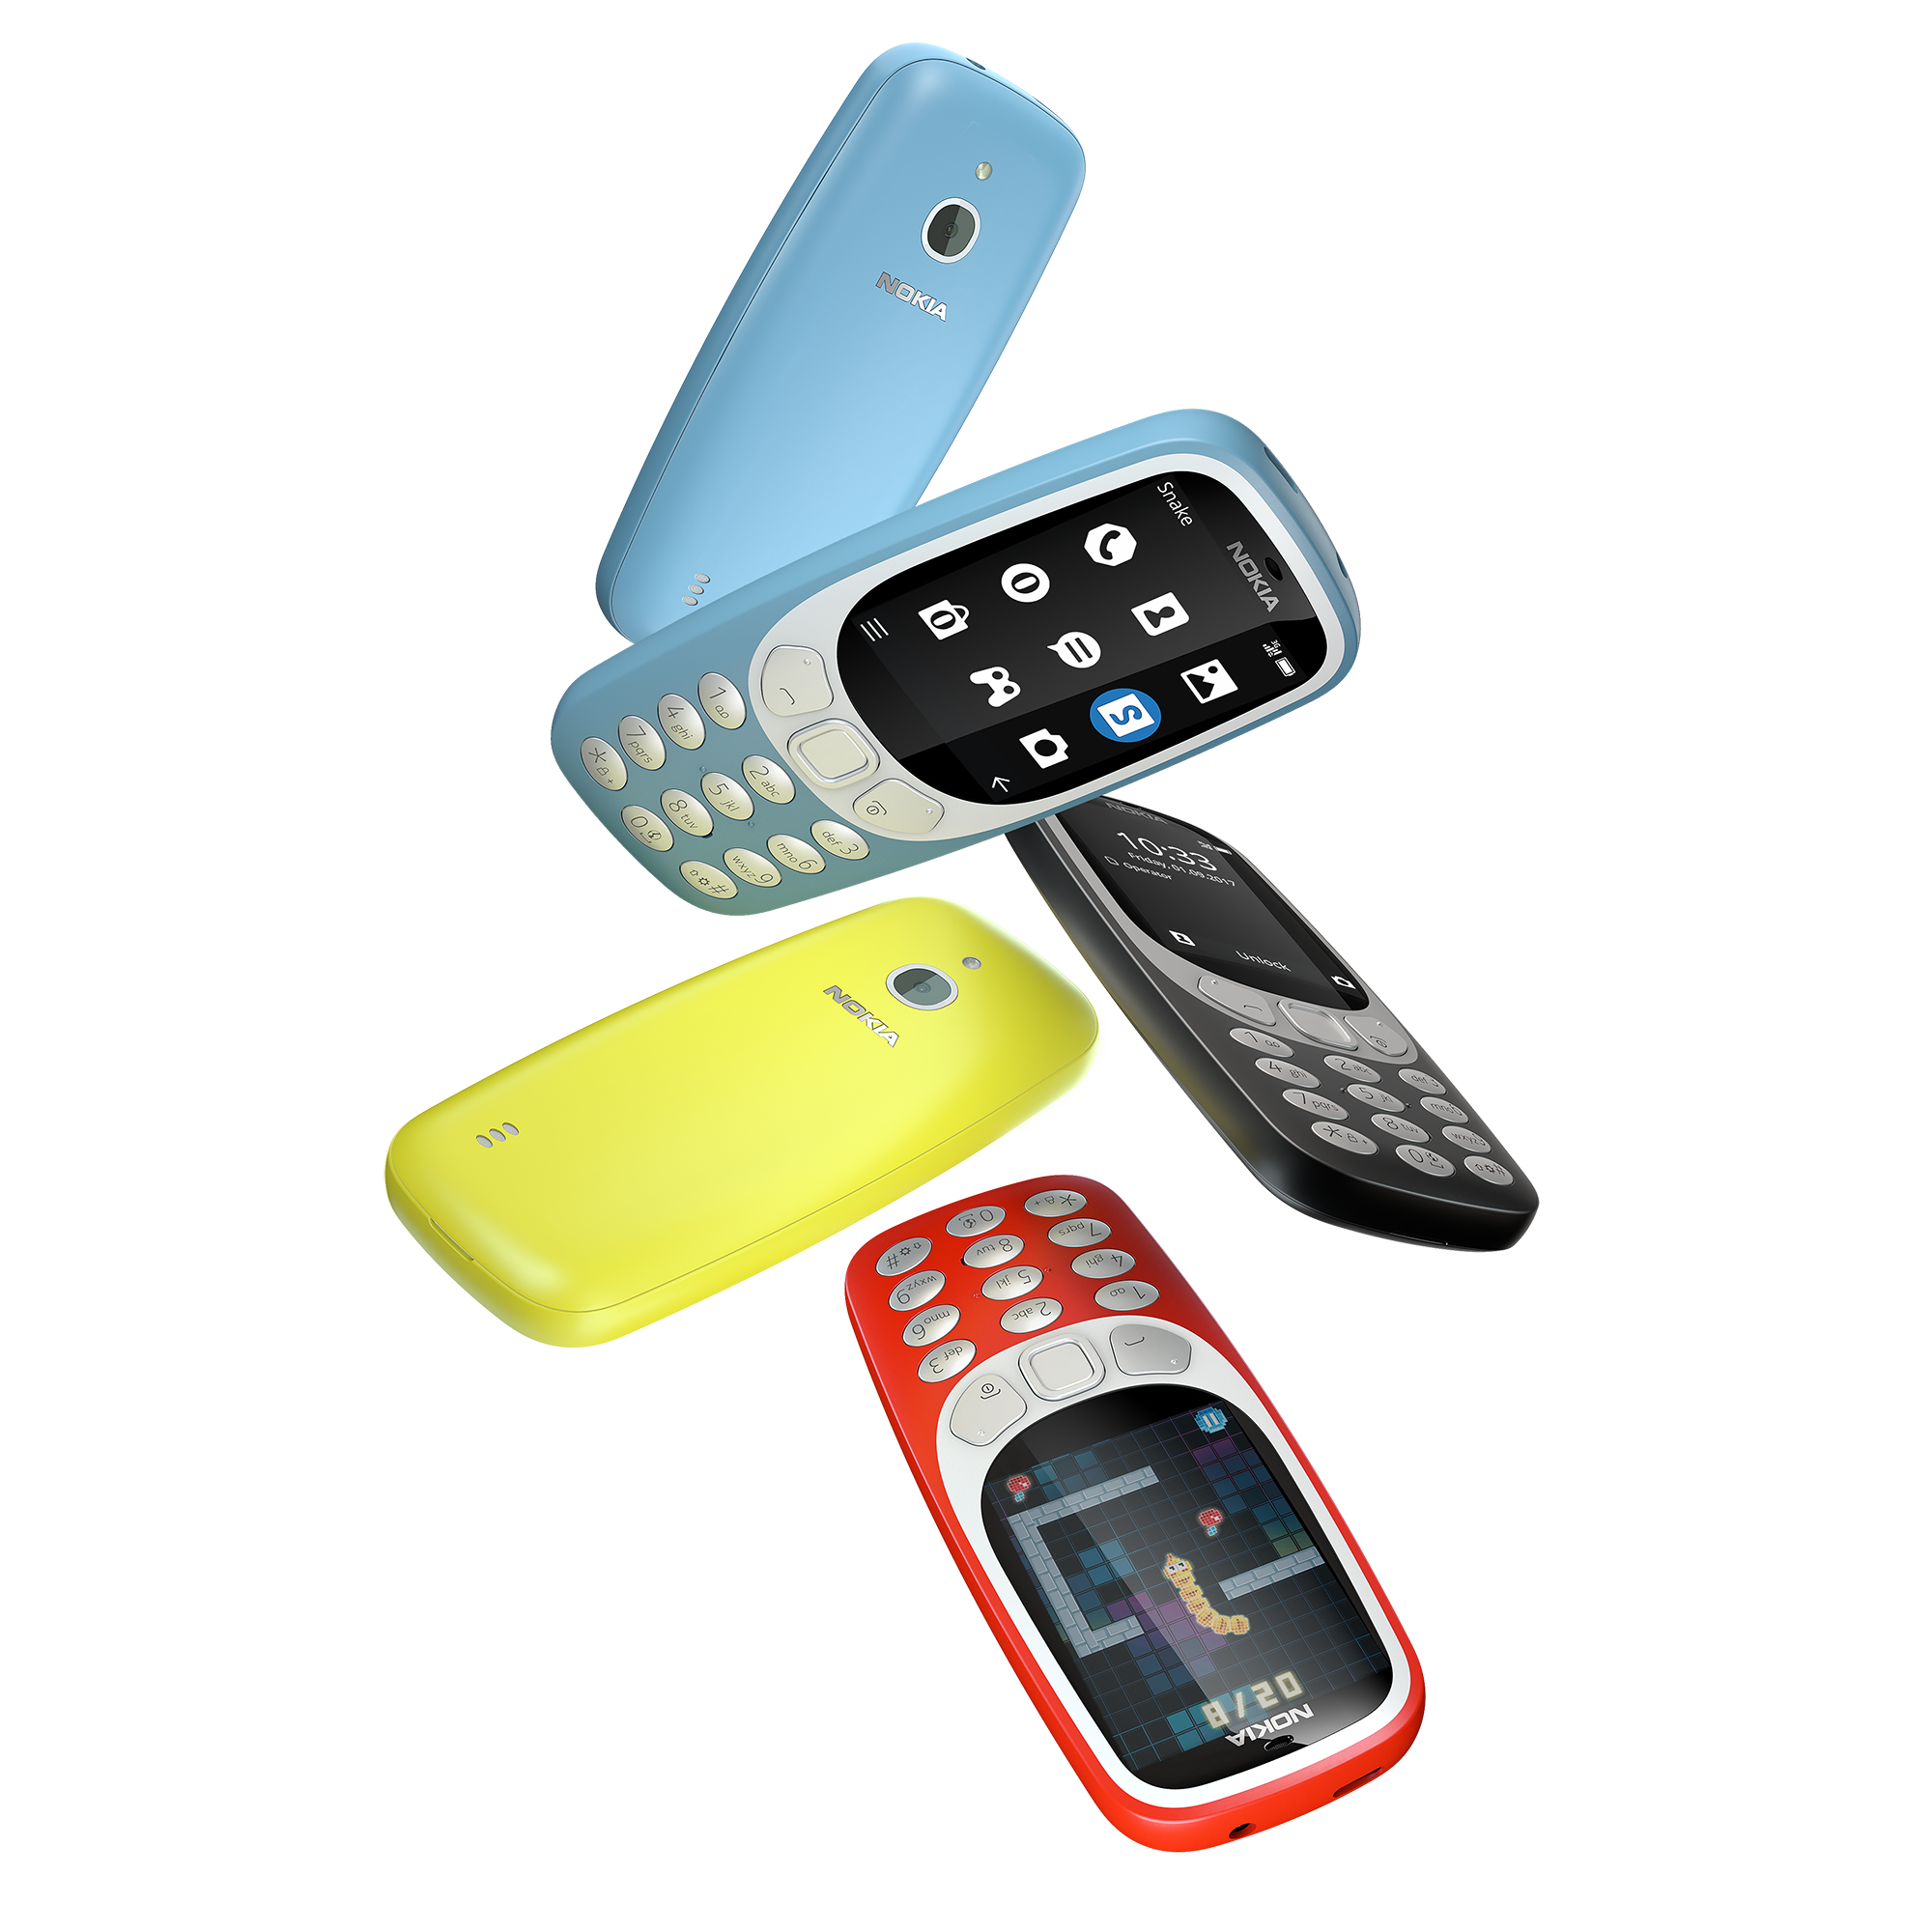 Nokia 3310 with 3G Now Available in PH: Priced at PhP2,790